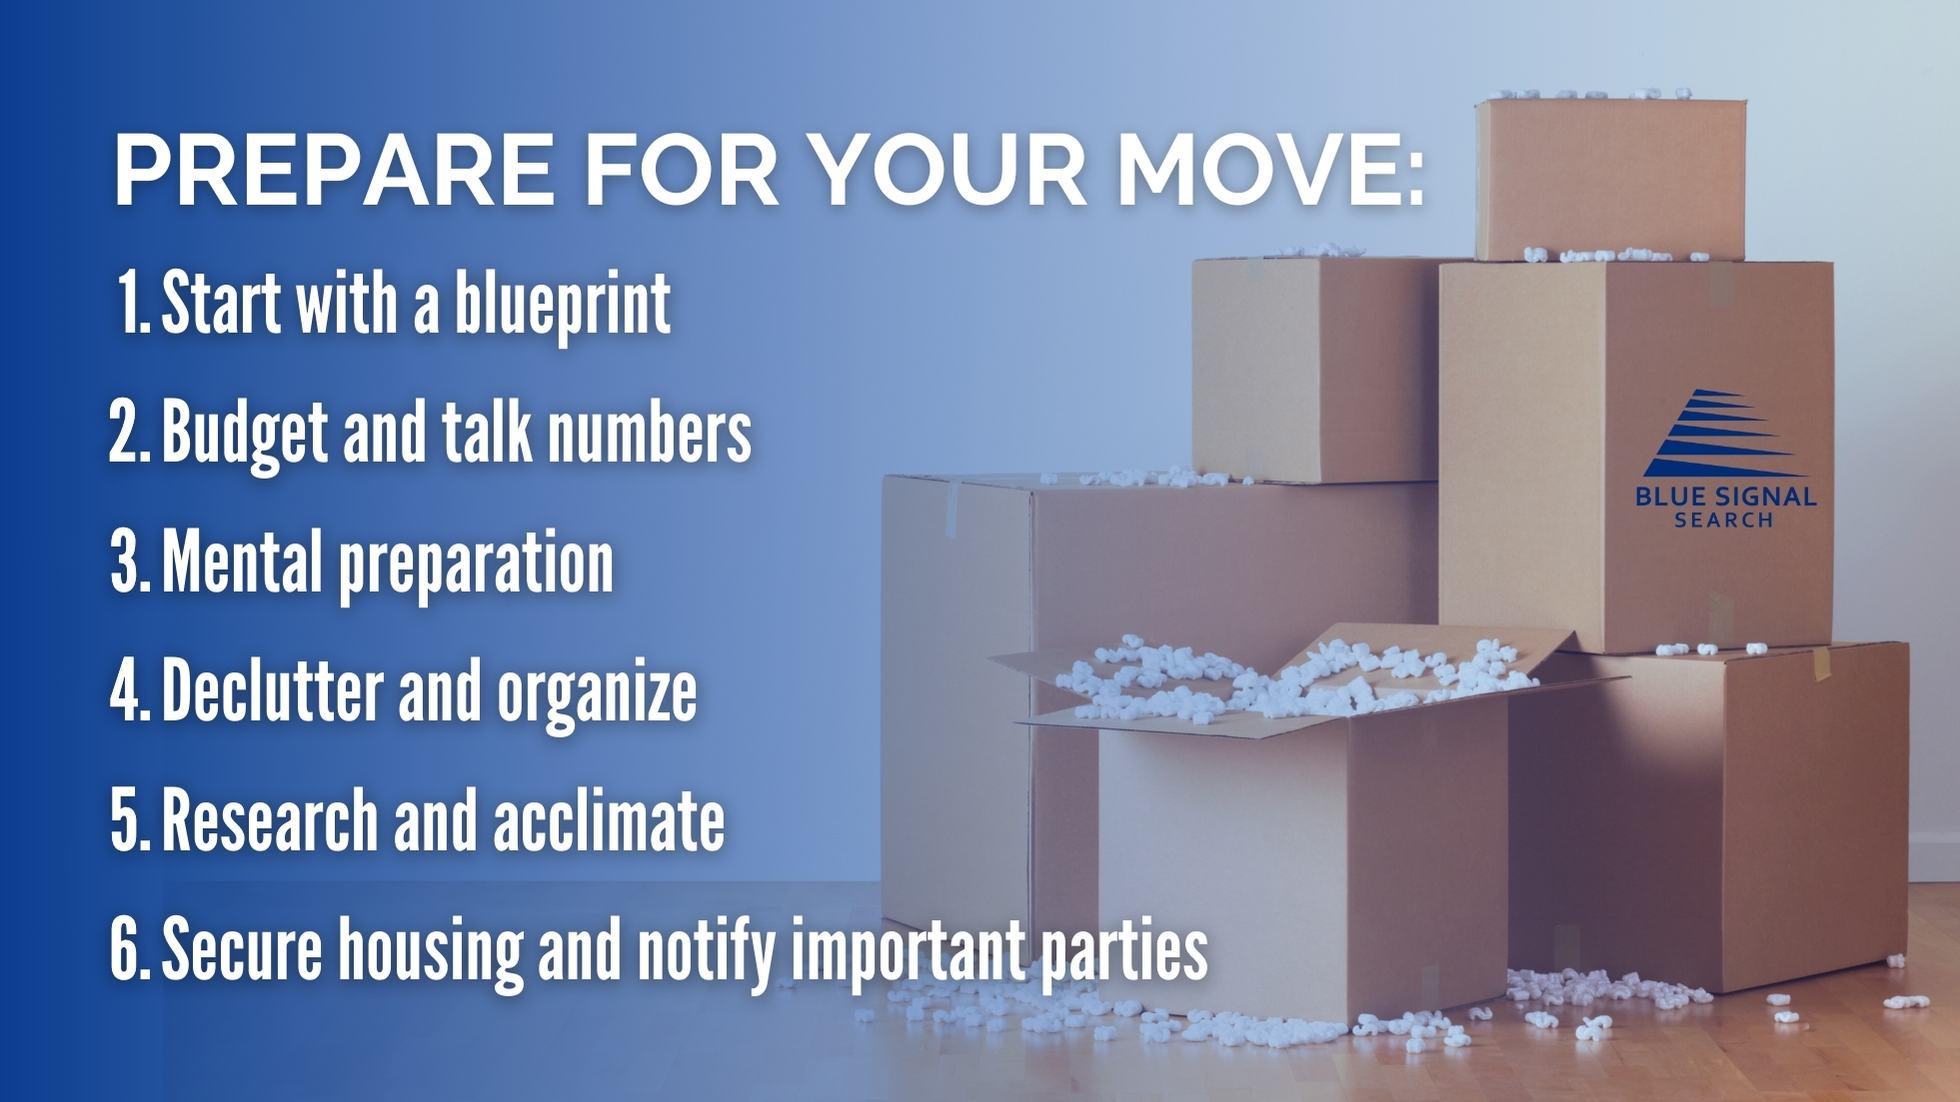 Checklist for moving preparation displayed in front of packed cardboard boxes with Blue Signal Search logo